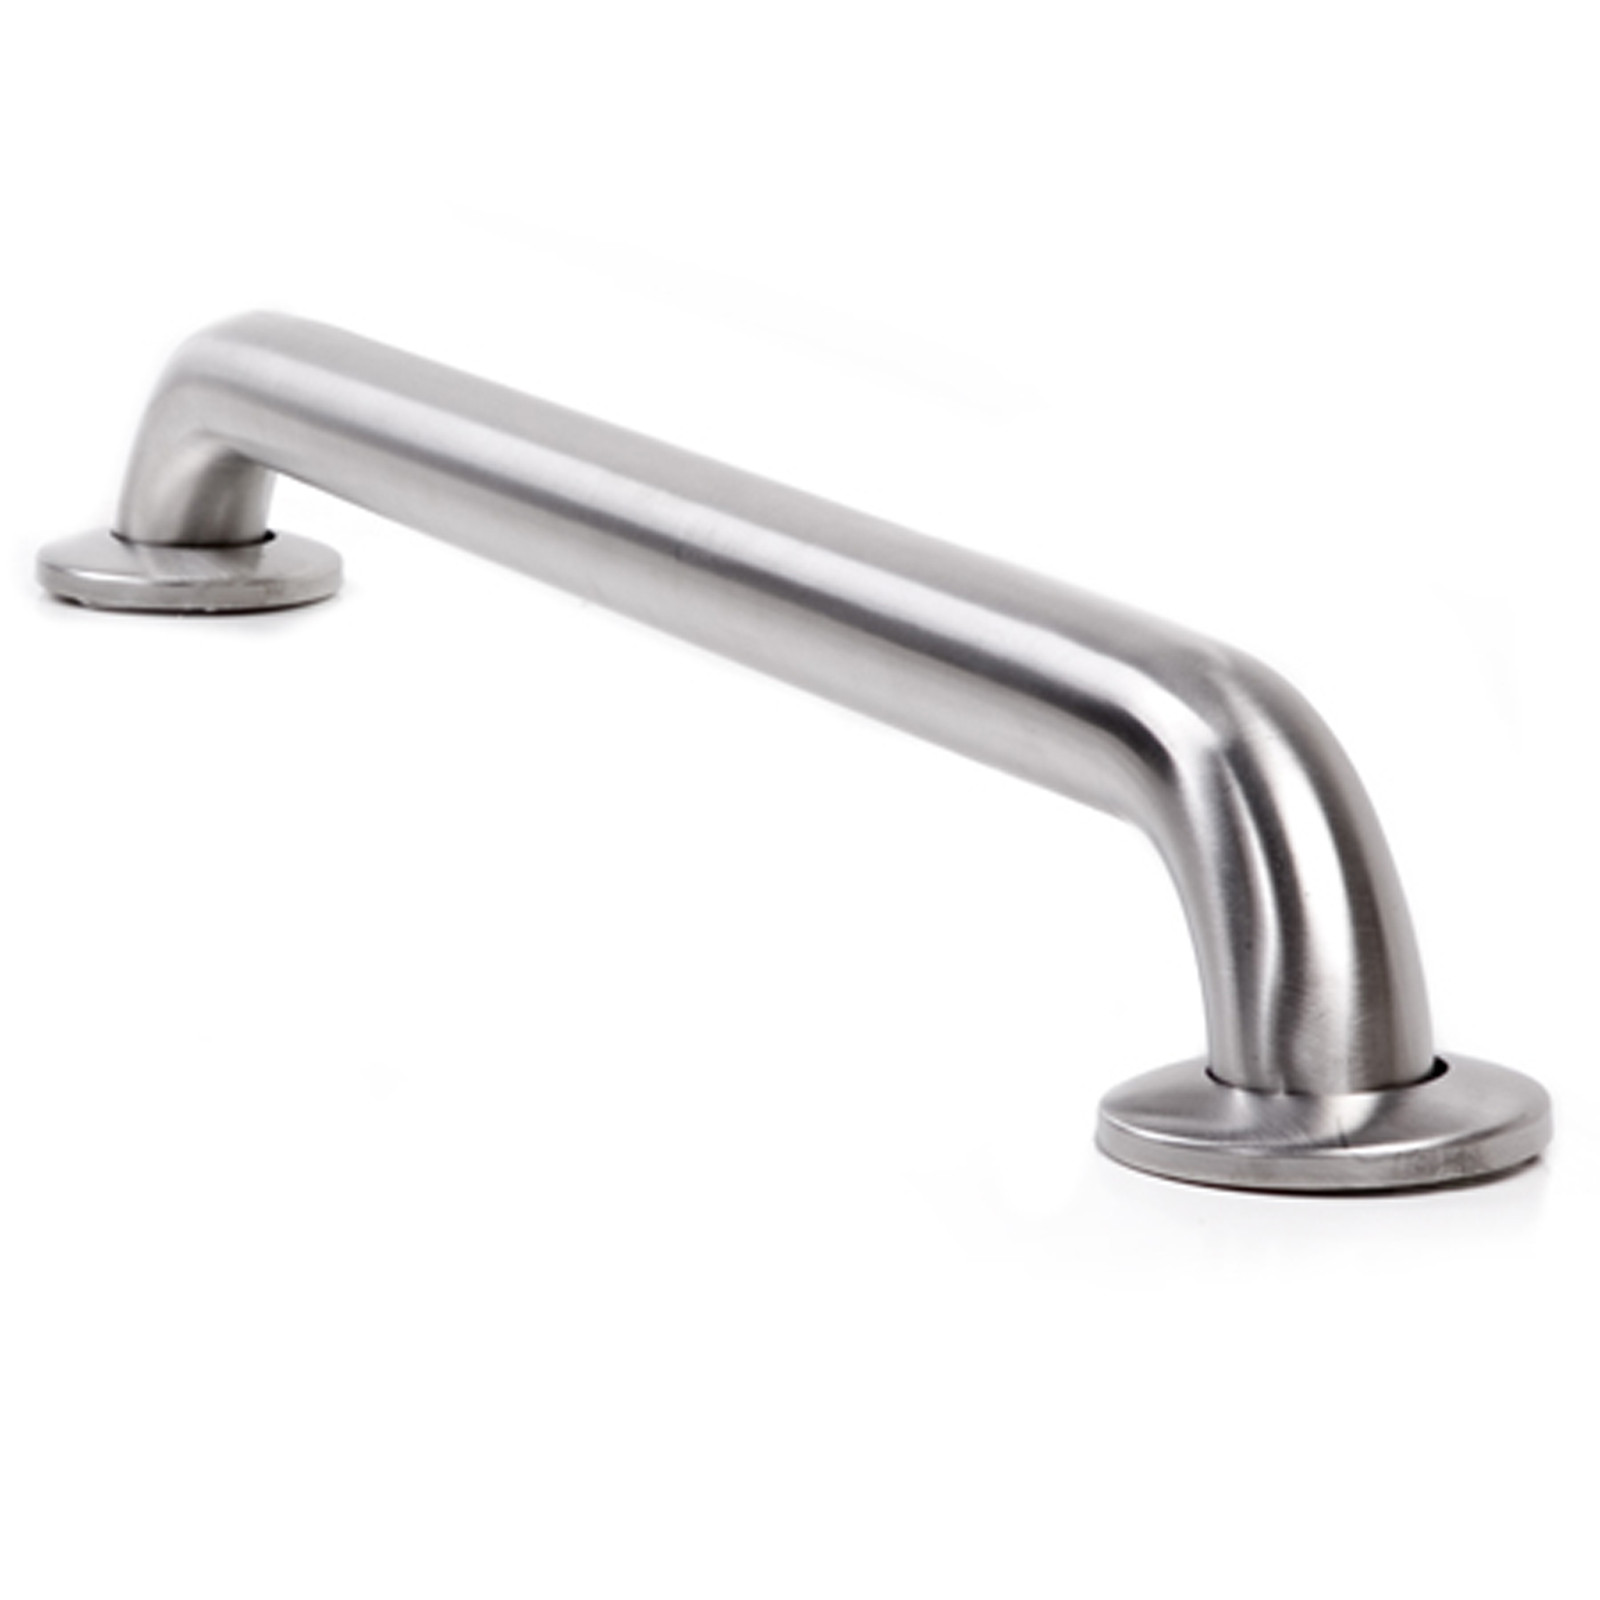 Arista GB-1825 18 Inch Stainless Steel Bathroom Safety Bar In Brushed Finish